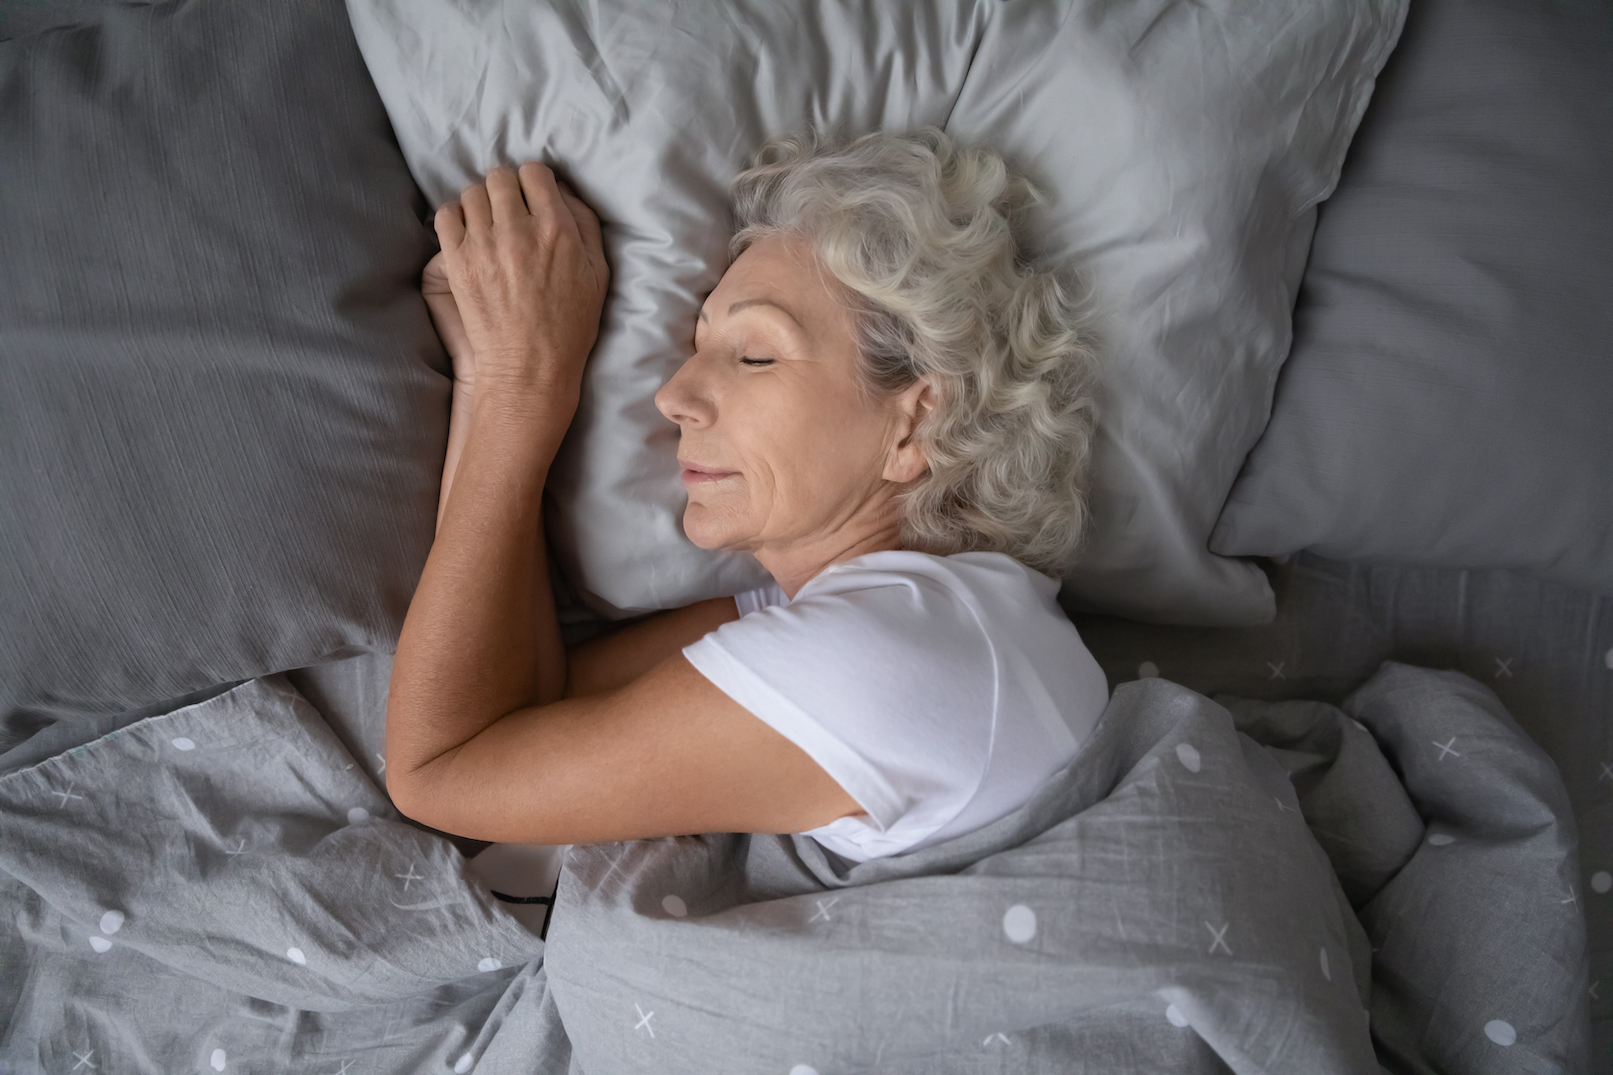 Above top view calm peaceful elderly mature hoary woman sleeping on soft pillow under blanket, illustrating the importance of deep sleep